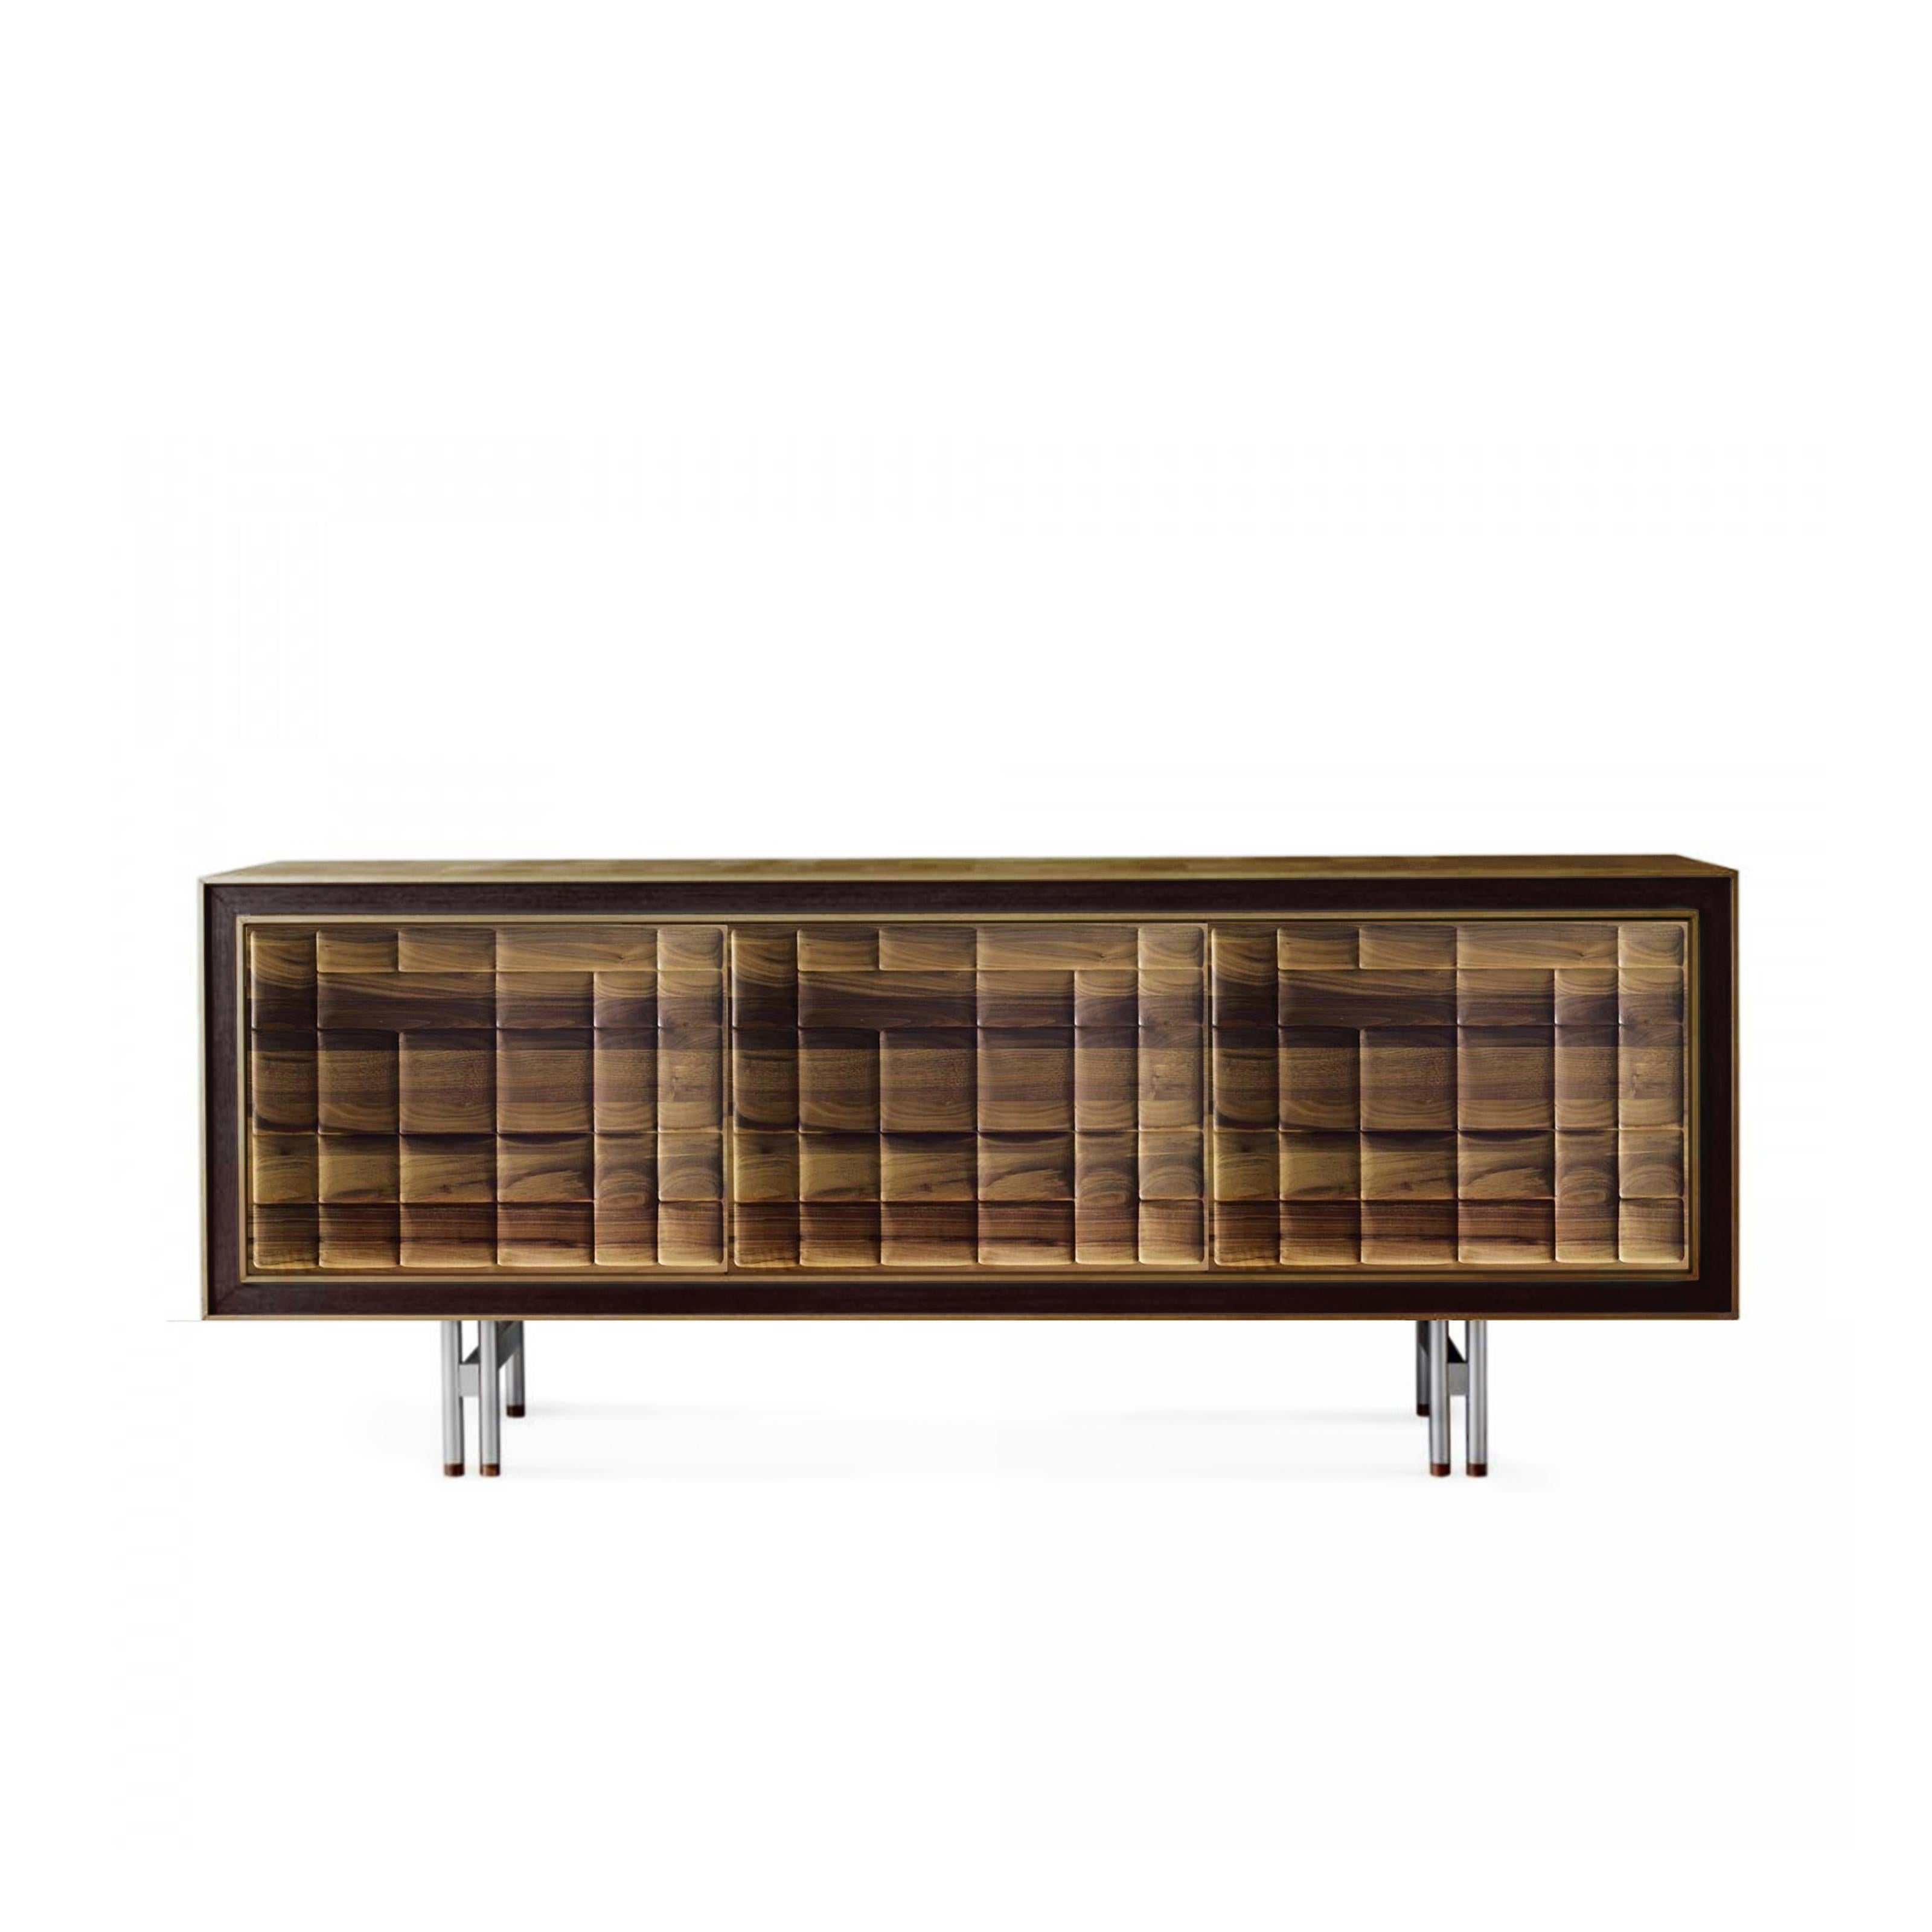 Oiled Quadra Scacco Solid Wood Sideboard, Walnut in Natural Finish, Contemporary For Sale